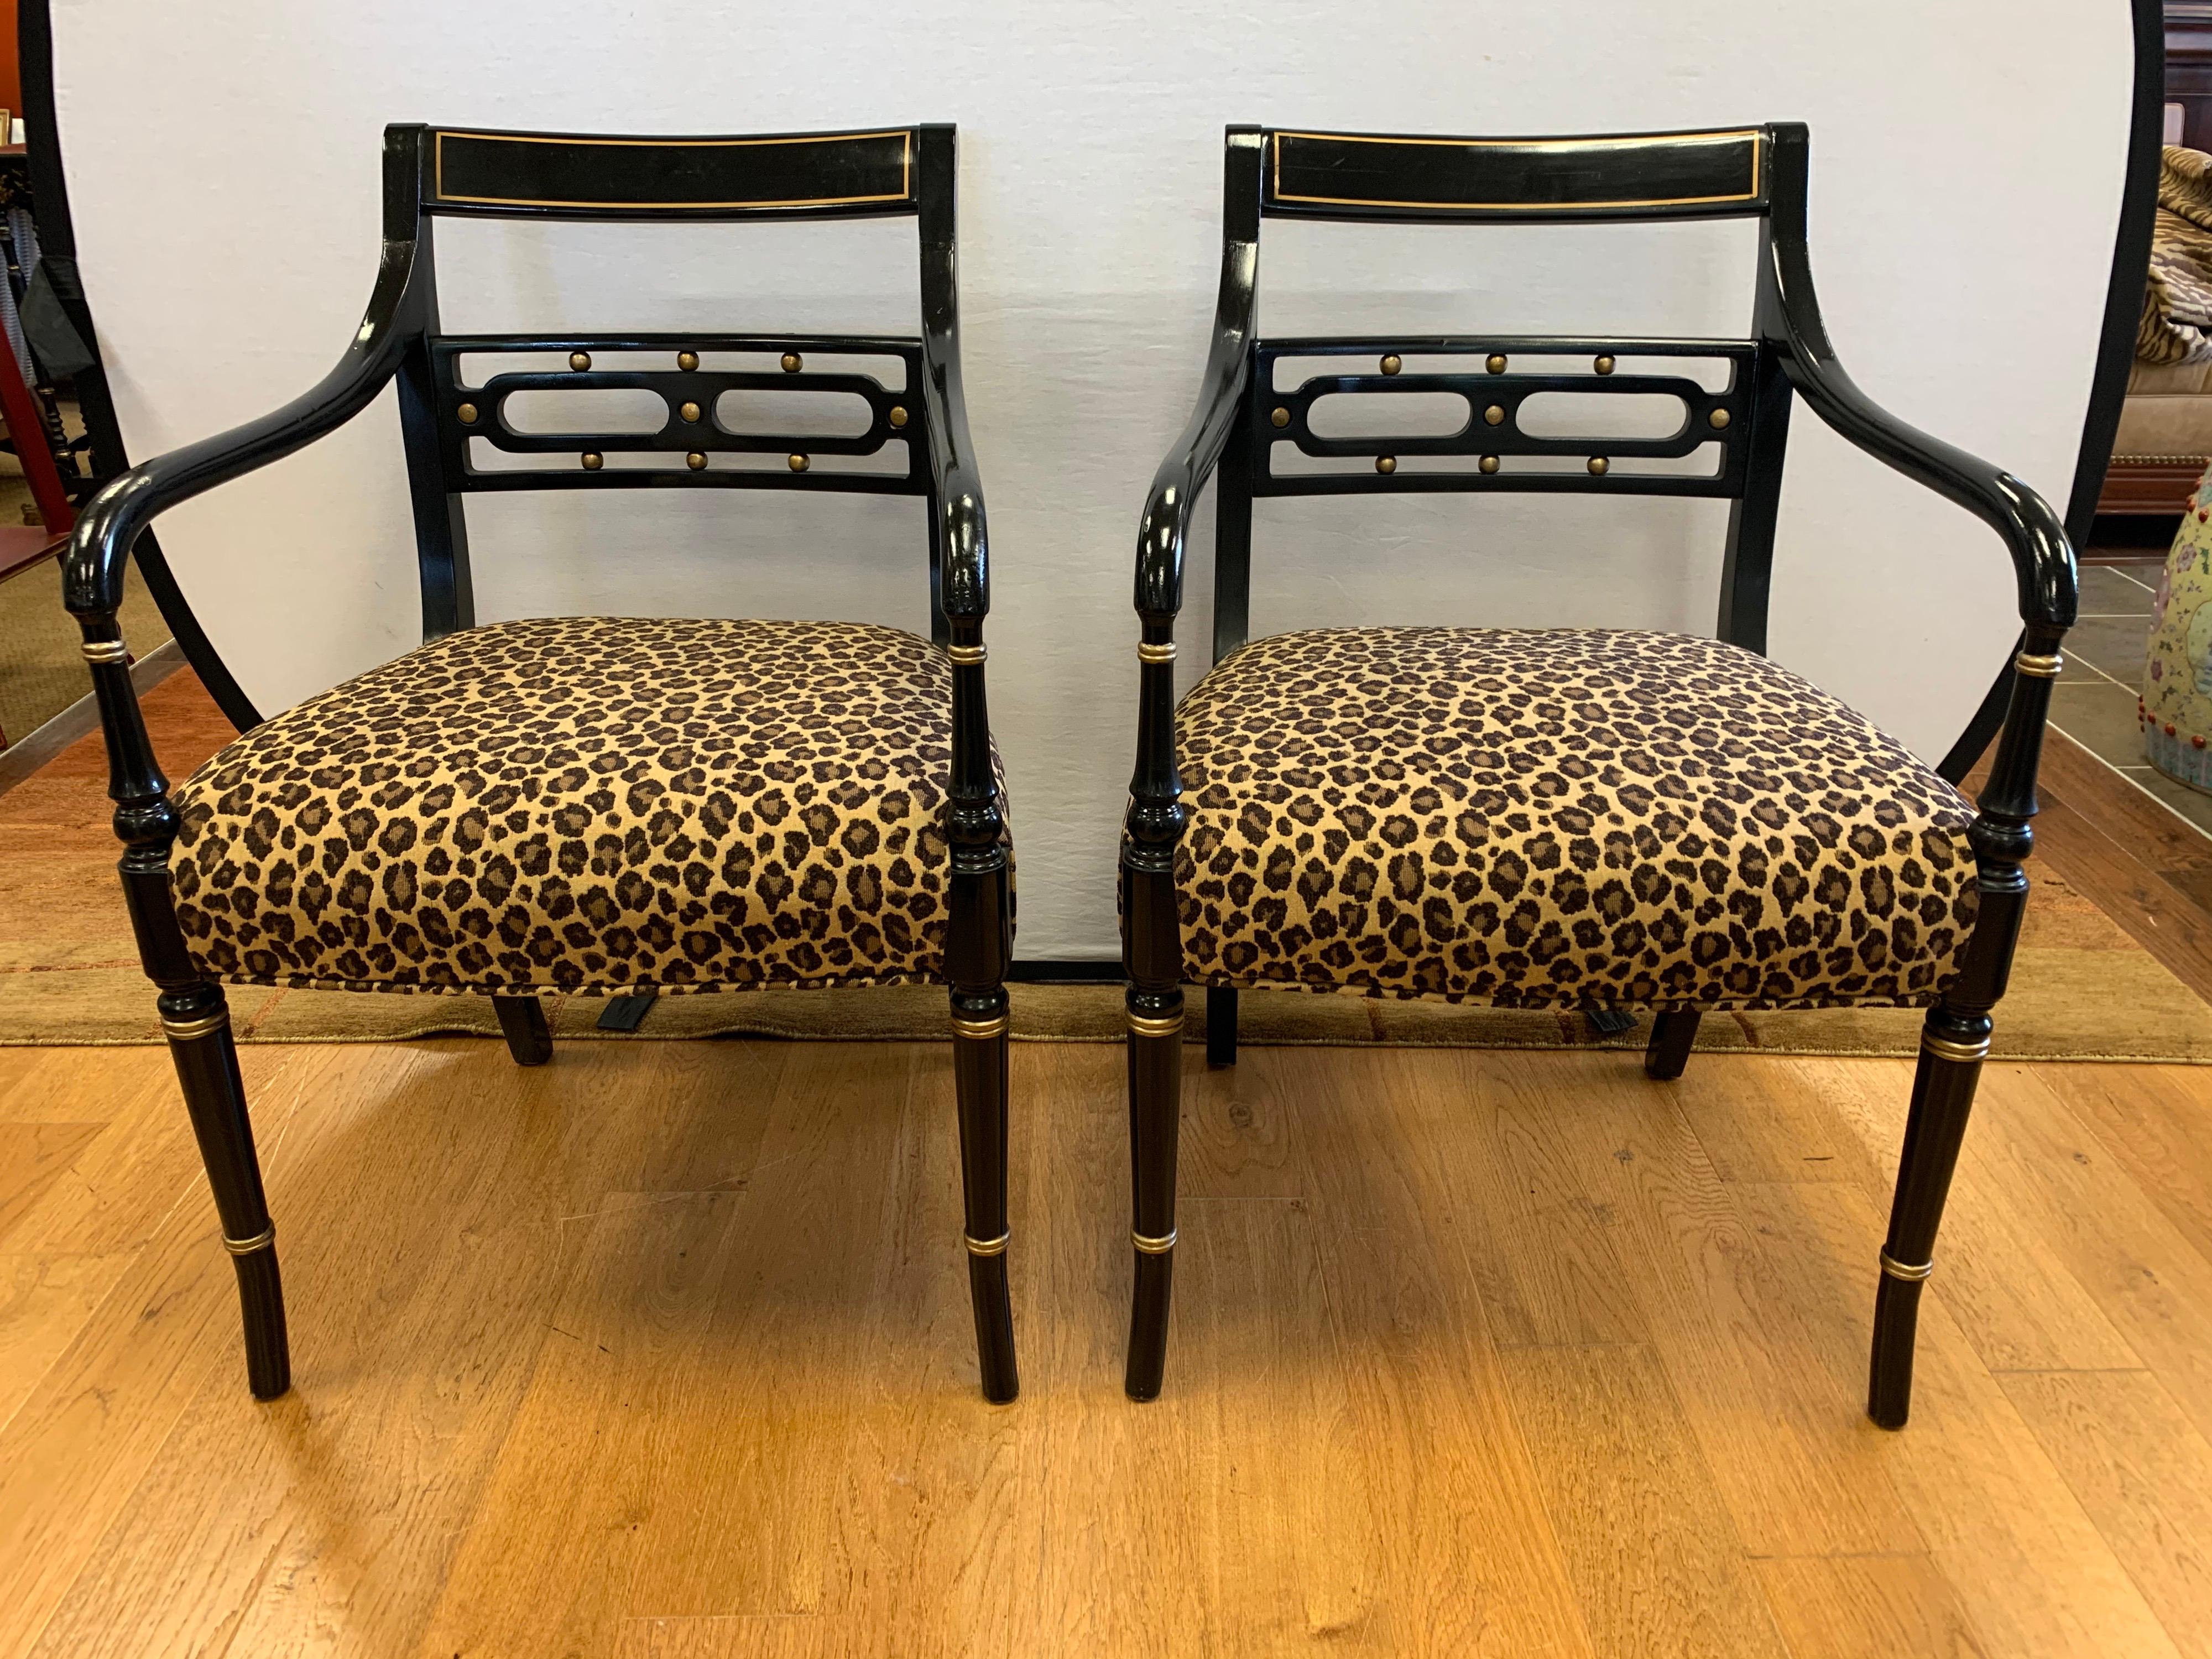 Elegant pair of Regency style dining chairs, ebonized with gold gilt highlights and newly upholstered in leopard print fabric. All dimensions are below. Upholstery is brand new and done in an elegant leopard print.